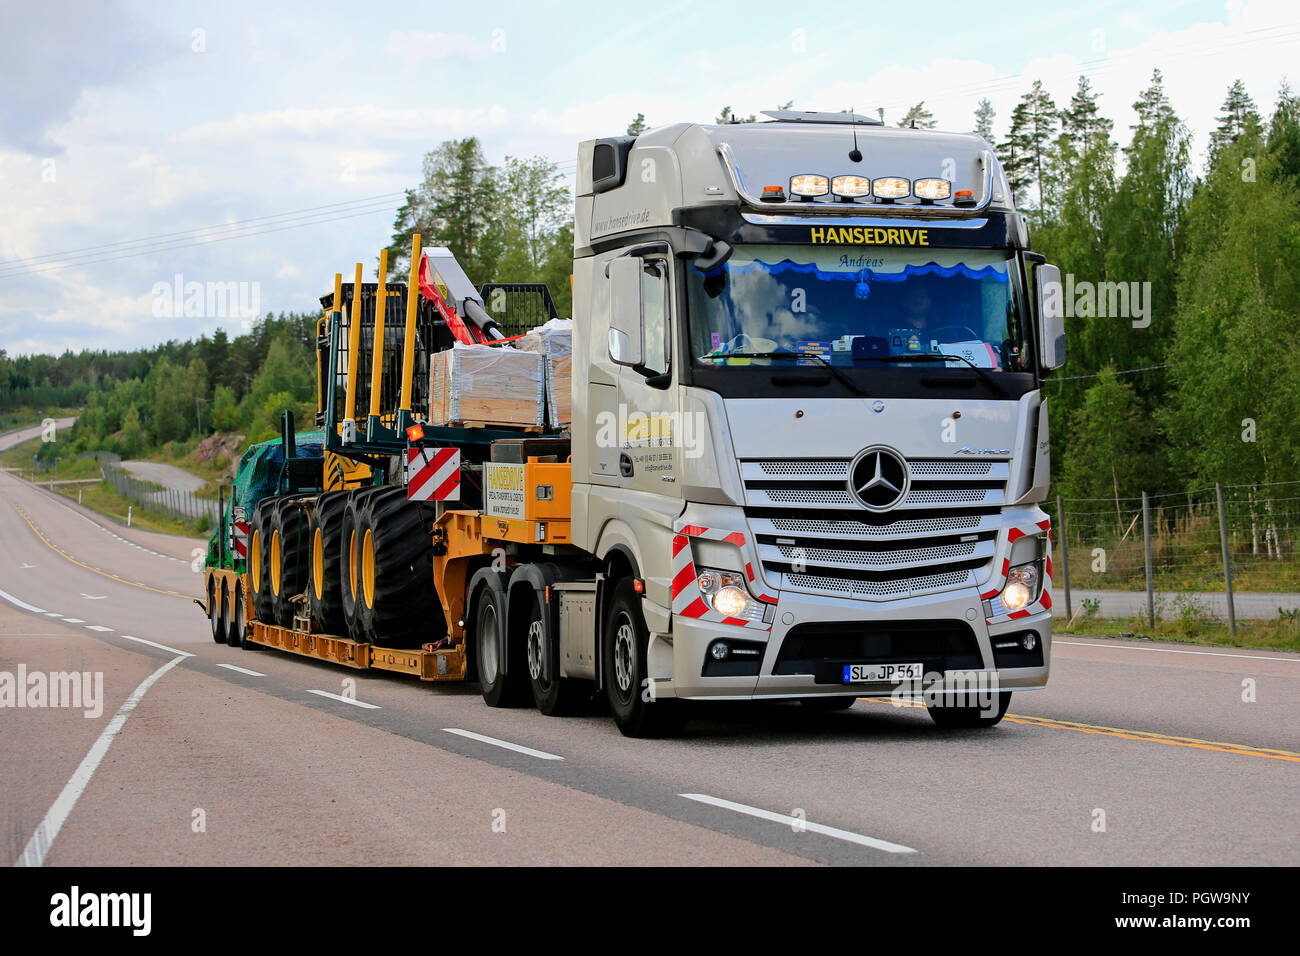 ORIVESI, FINLAND - AUGUST 27, 2018: Mercedes-Benz Actros semi trailer of  Hansedrive transports forest machinery on highway in Finland on overcast  day Stock Photo - Alamy